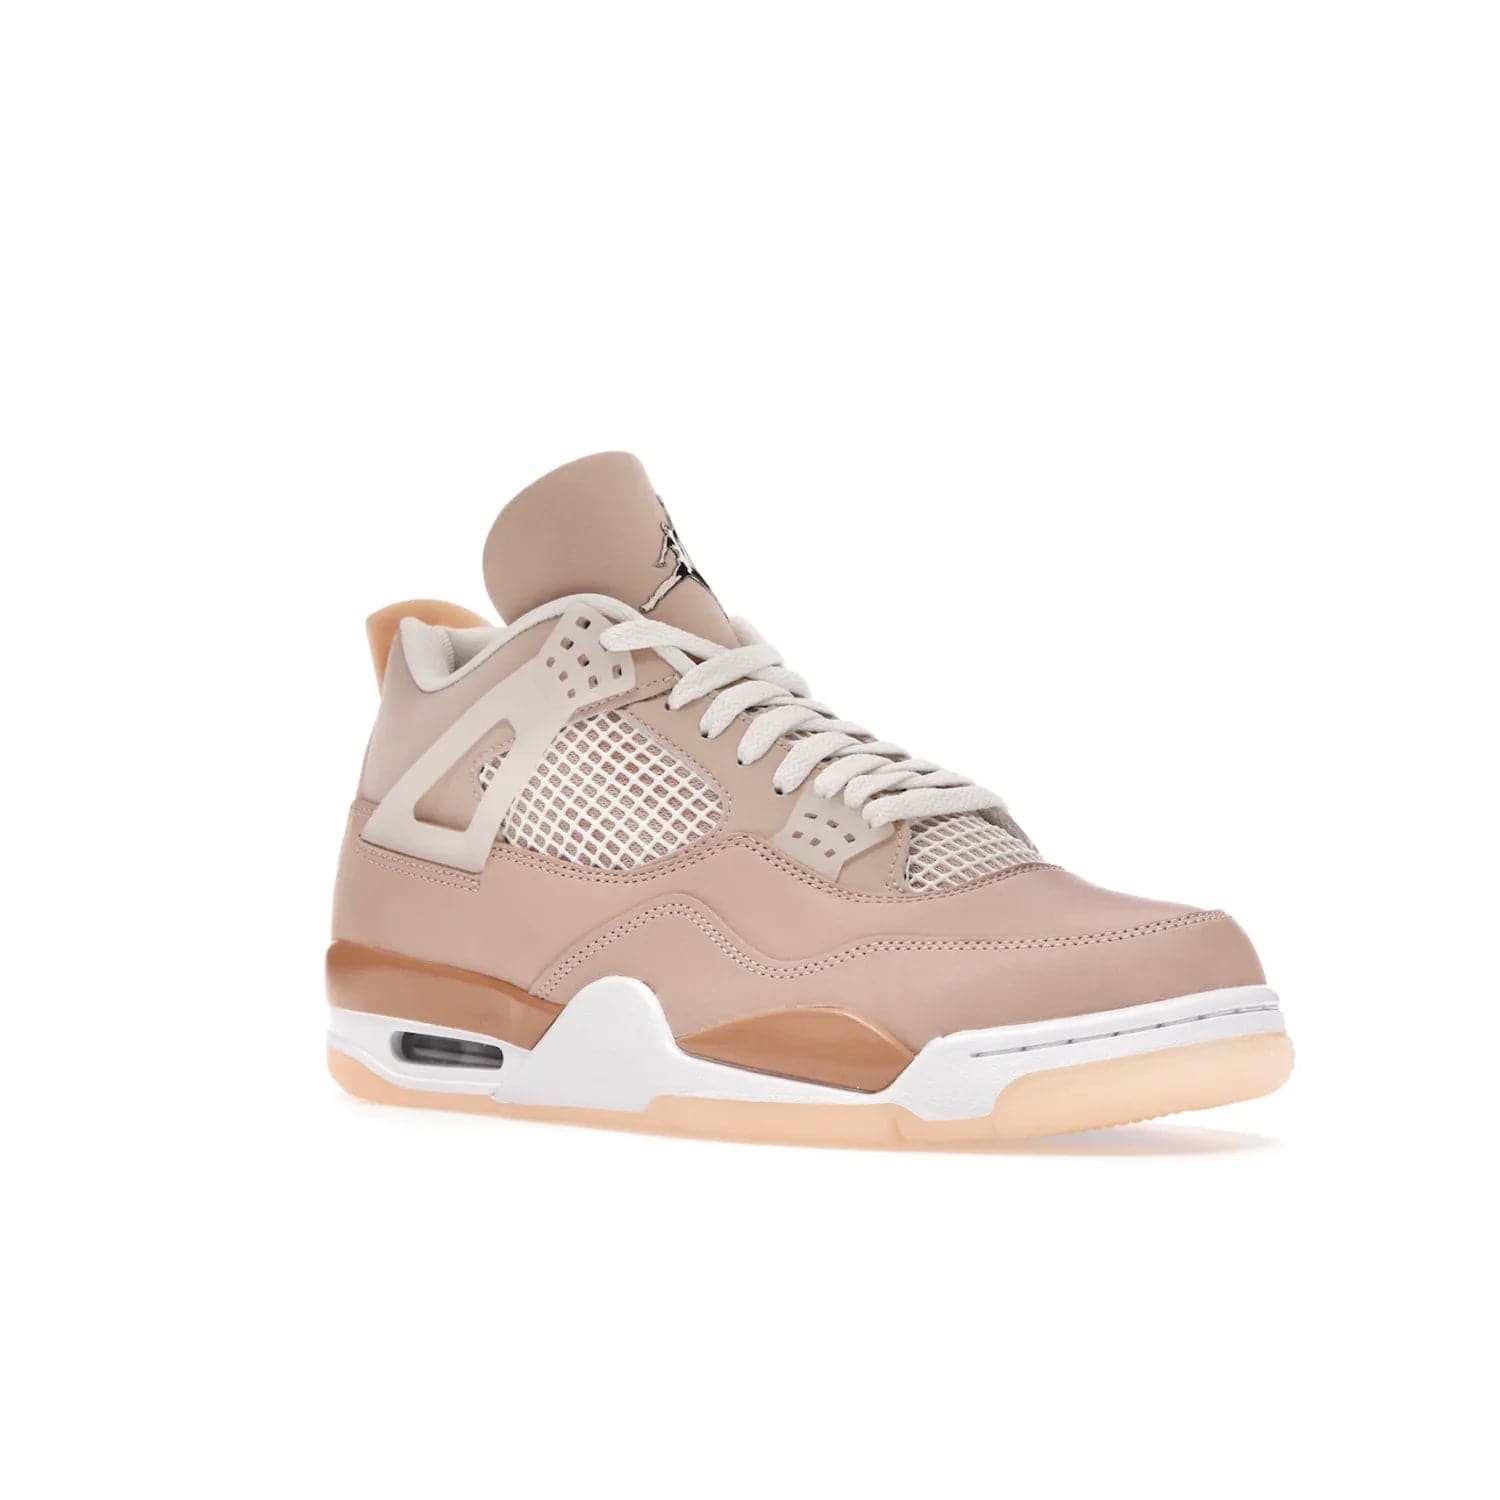 Jordan 4 Retro Shimmer (Women's) - Image 5 - Only at www.BallersClubKickz.com - Air Jordan 4 Shimmer (W): A women's-exclusive design with a buttery beige upper and Silver/Orange Bronze details. Durabuck and metallic Jumpman branding elevate the iconic silhouette. Shop now.